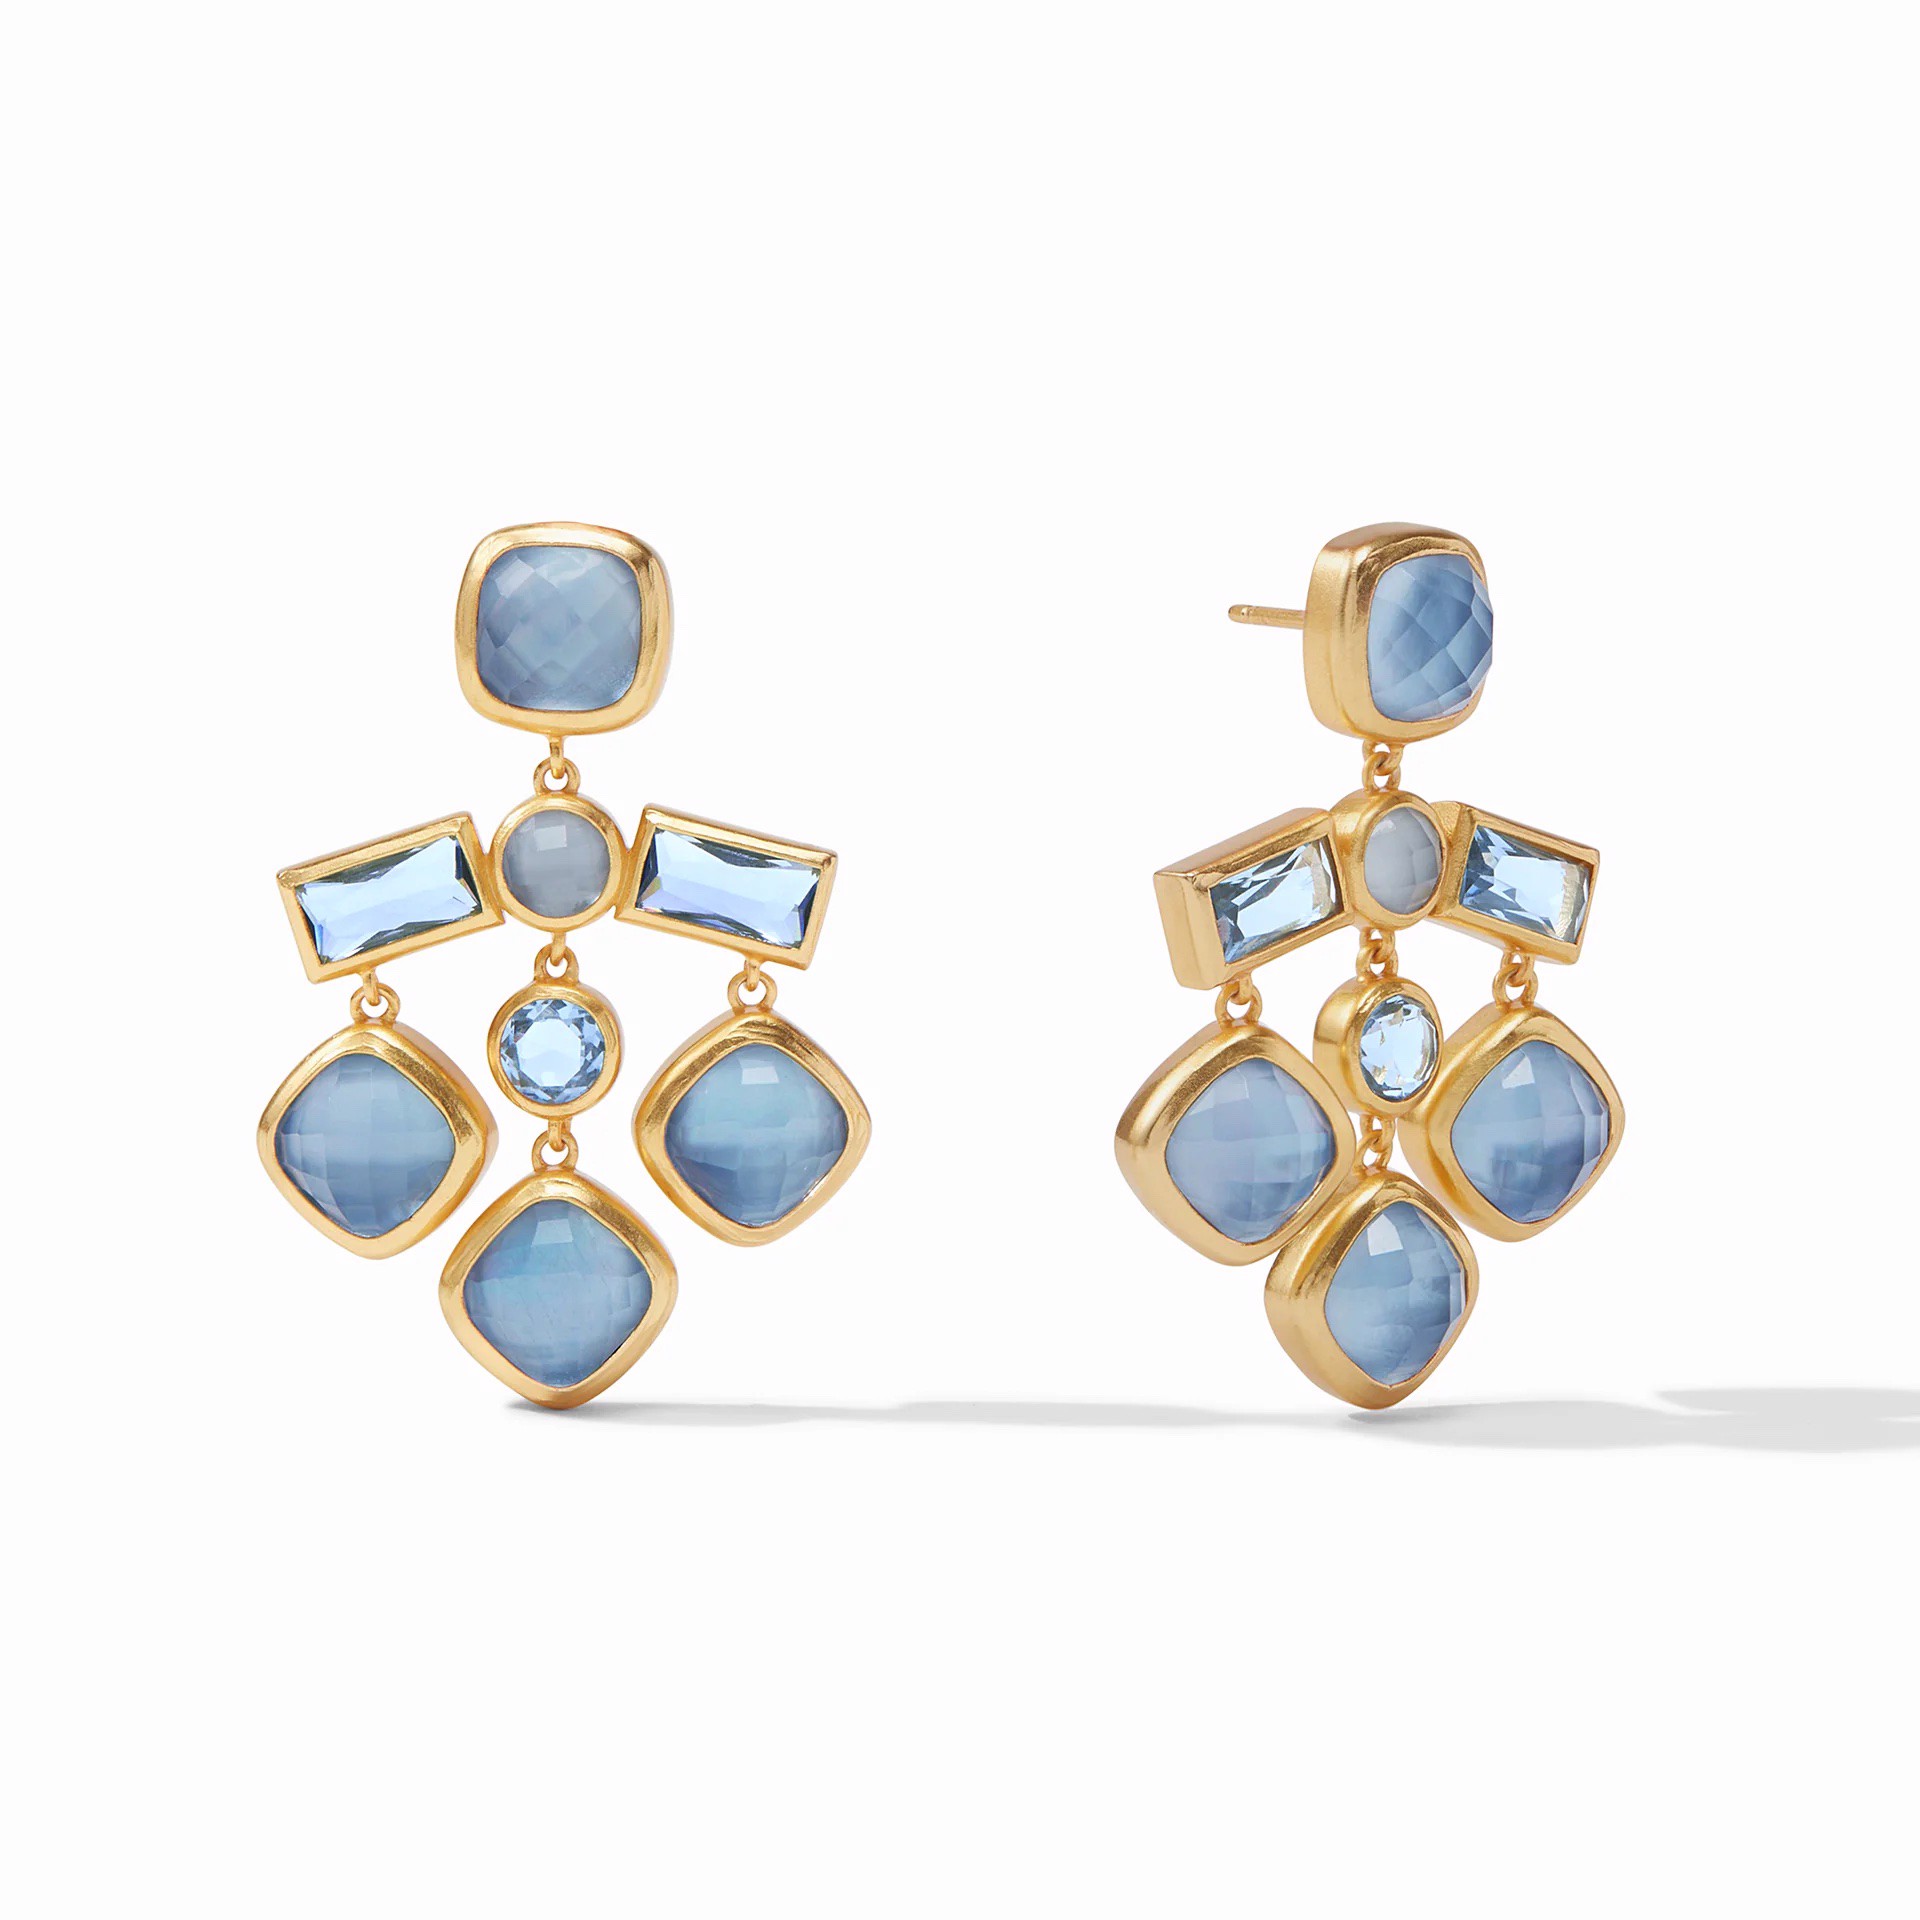 Antonia Chandelier Earring - Chalcedony Blue by Julie Vos